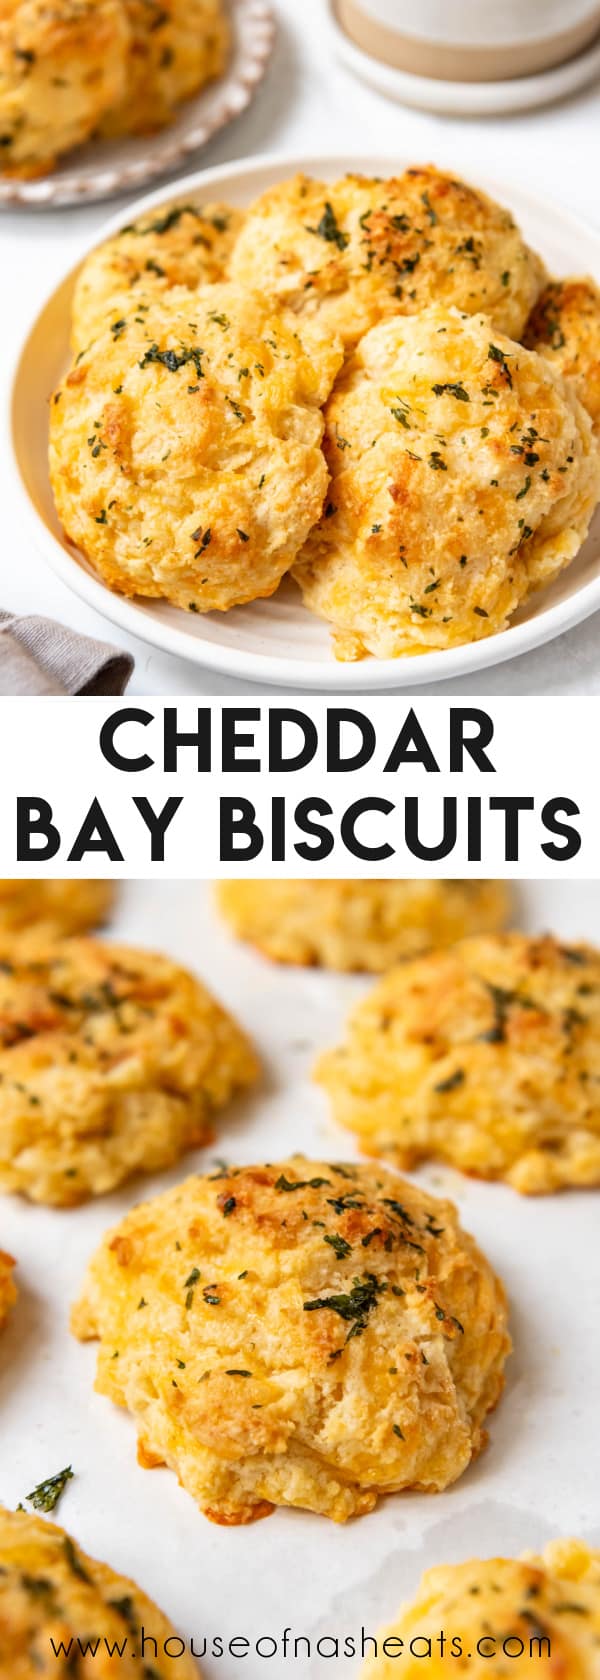 A collage of images of cheddar bay biscuits with text overlay.